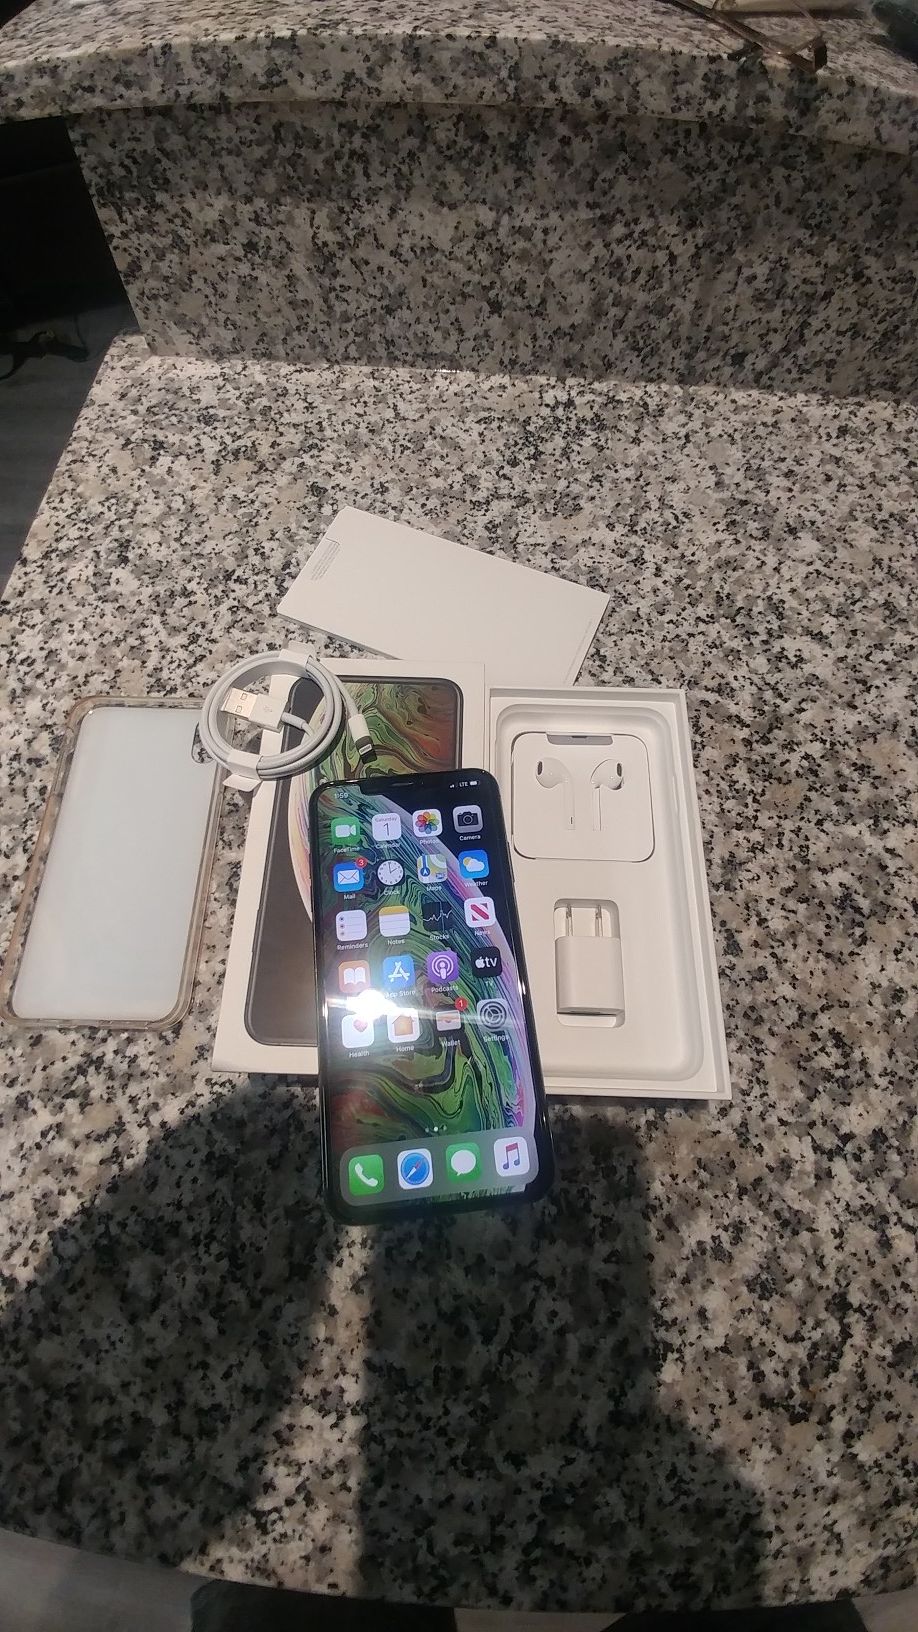 Iphone XS MAX, unlocked amd in execellent condition. With box' book, case & privacy screen protector $480